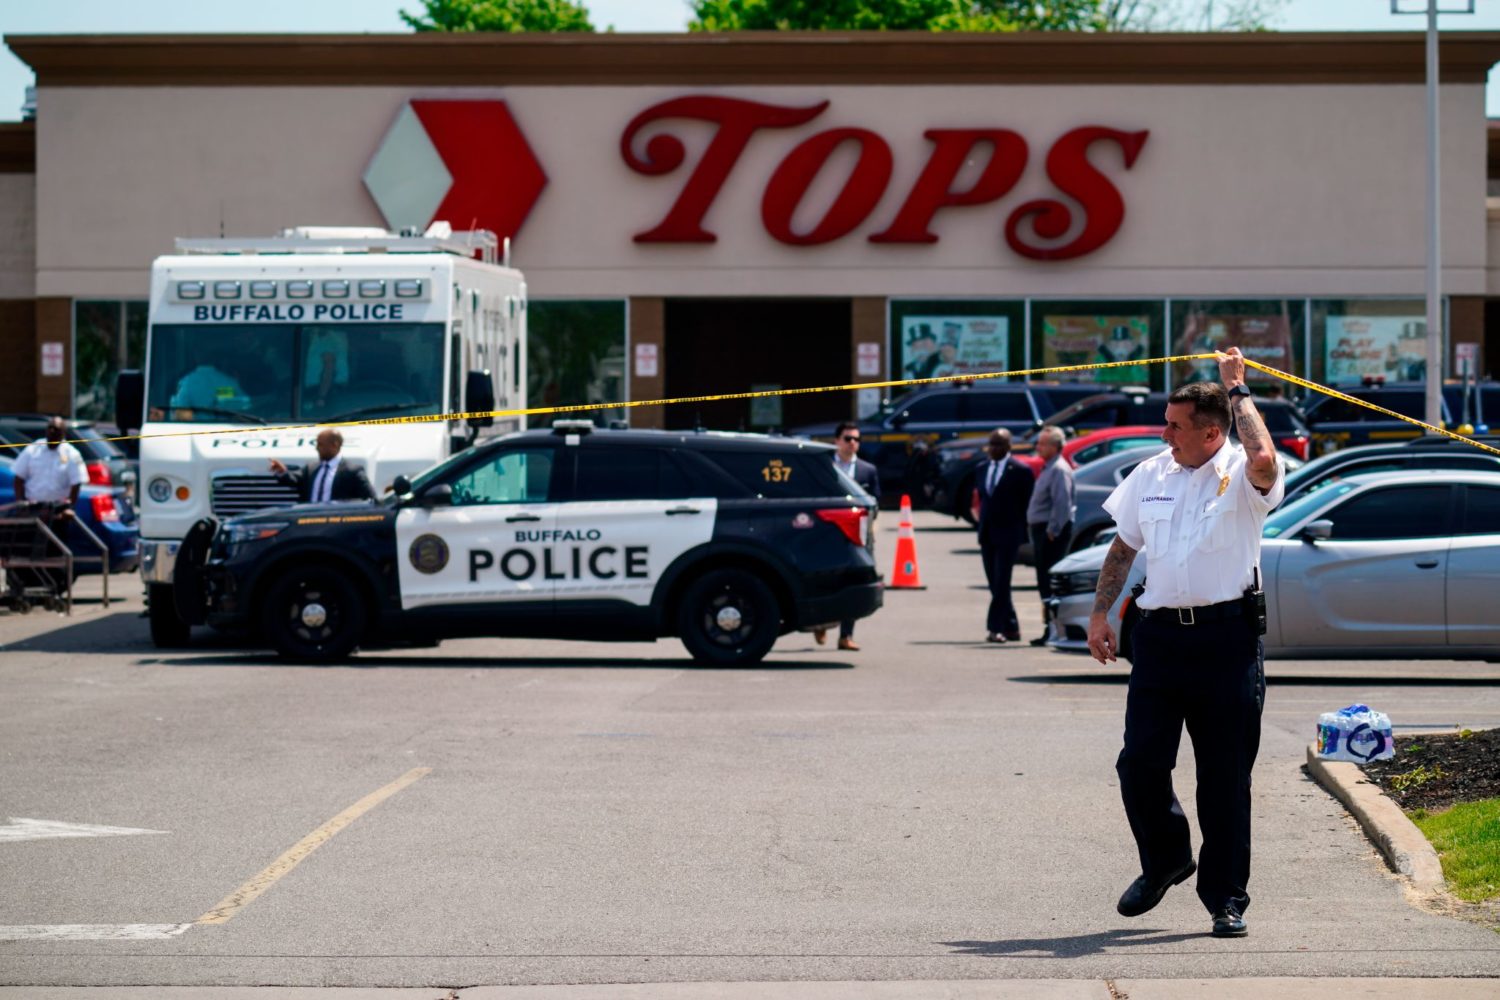 What role did right-wing media play in the Buffalo shooting?